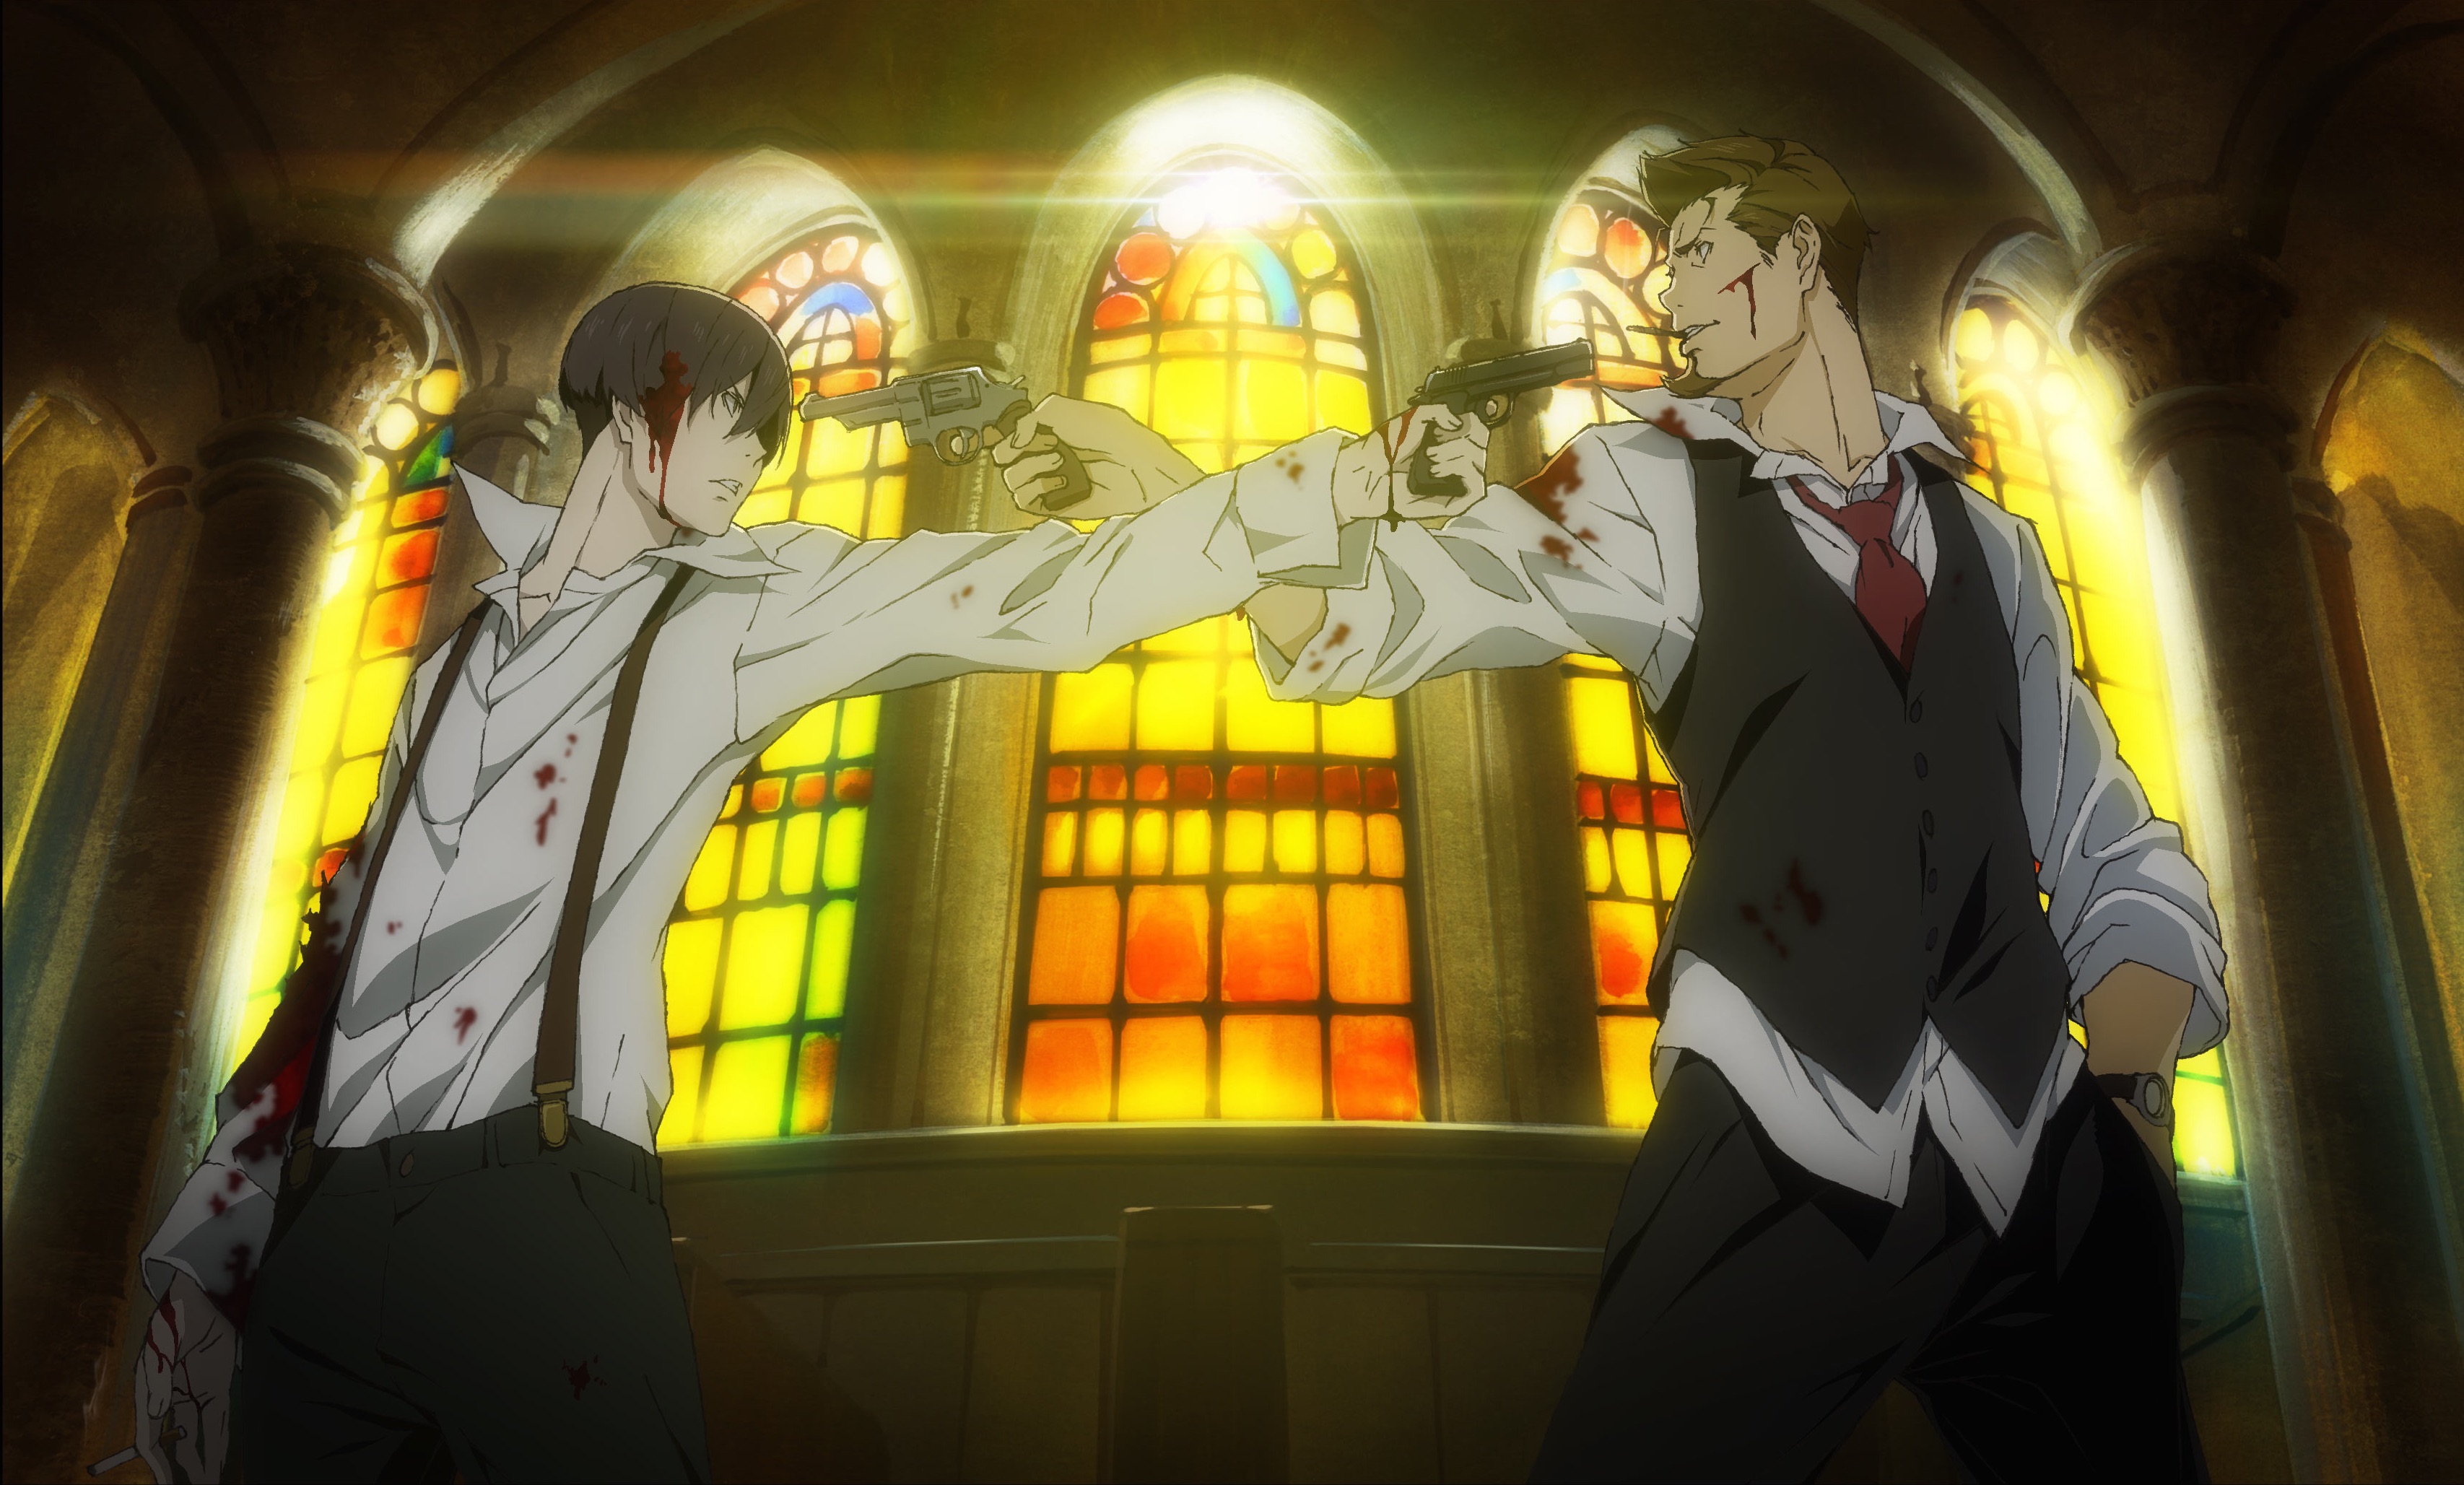 Watch 91 Days For a More Serious Take On Anime